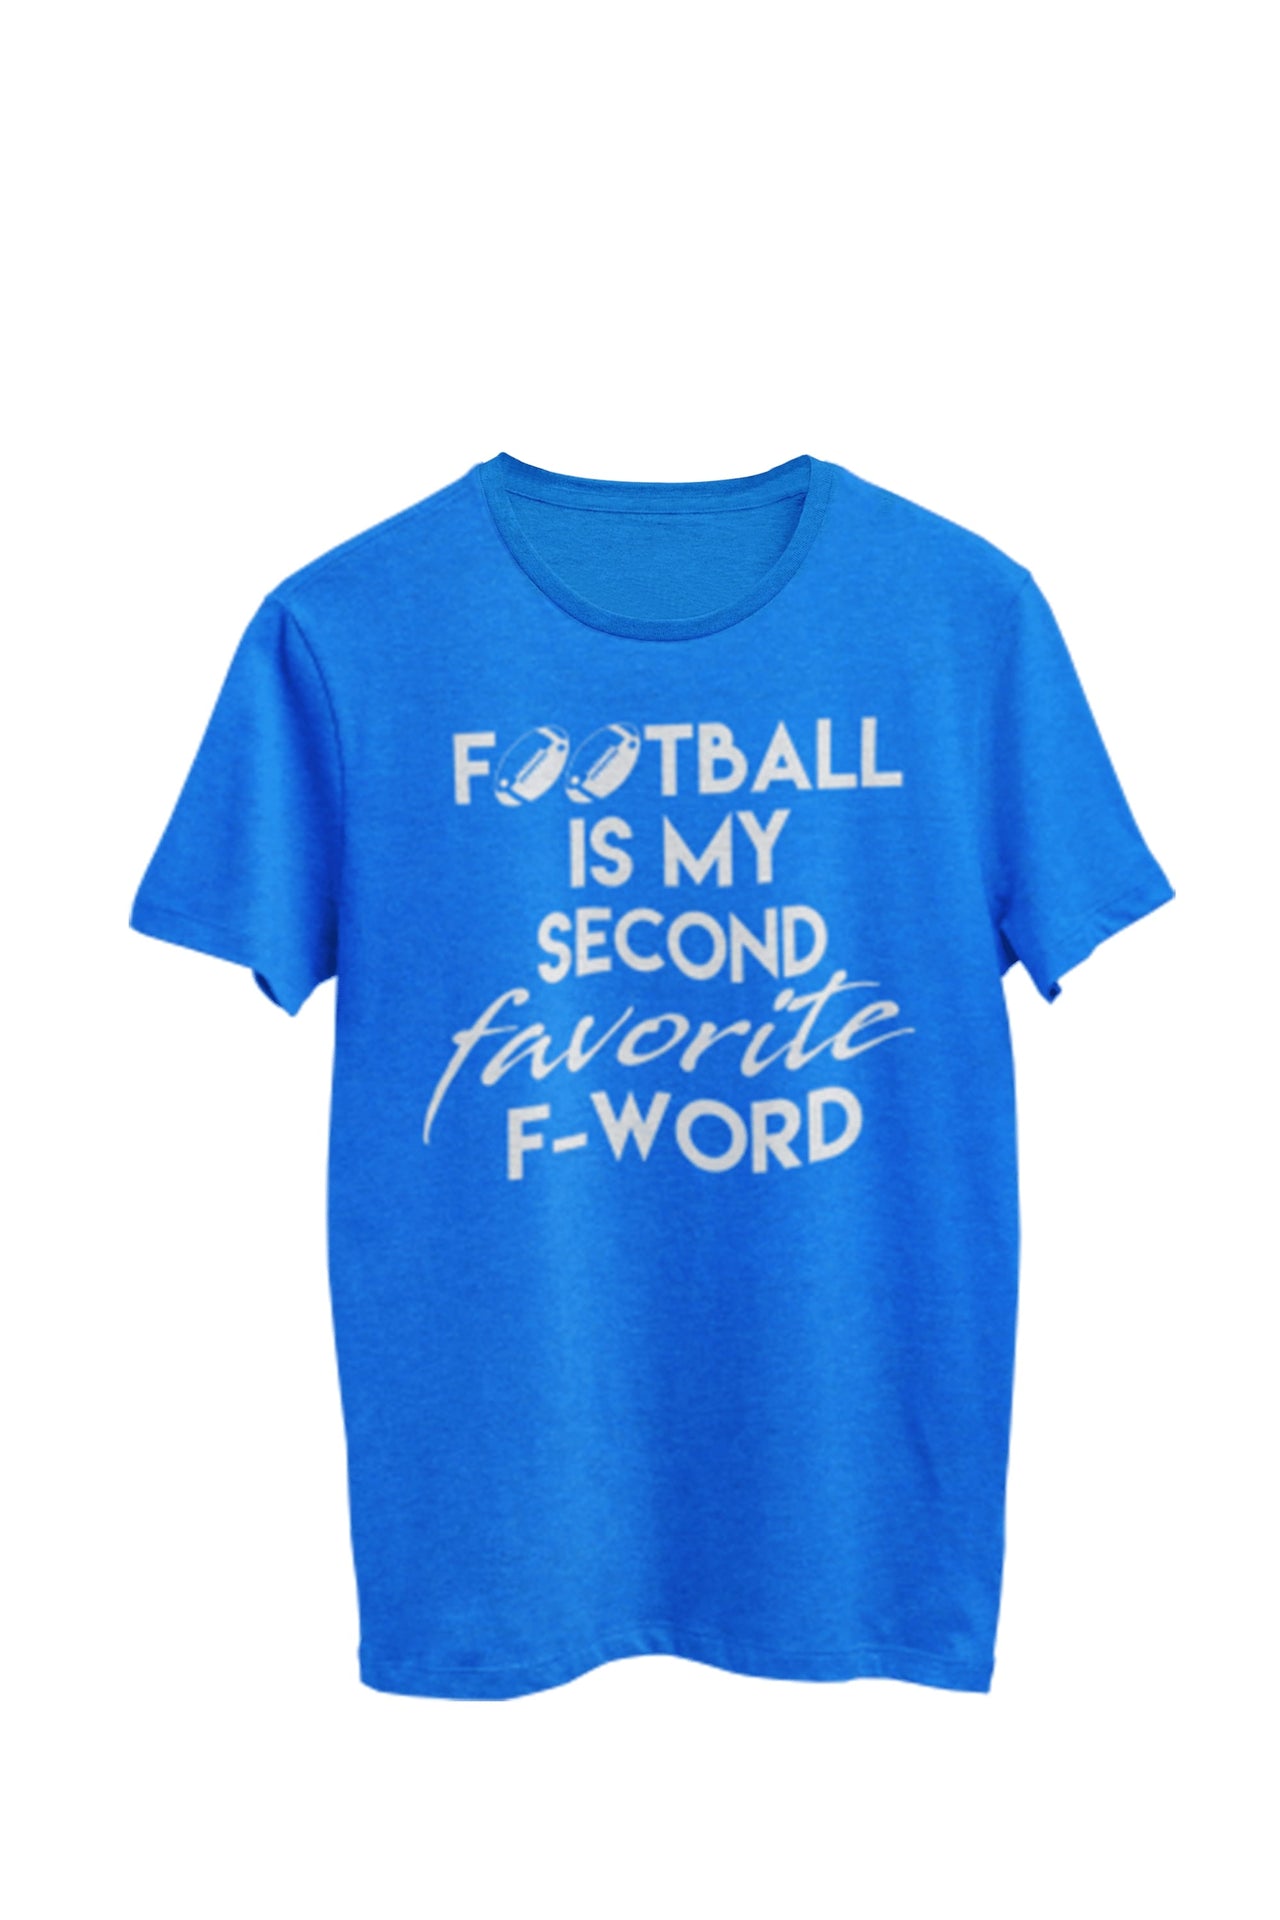 Royal blue heather unisex t-shirt featuring the text 'Football is my second favorite F word'. Design by WooHoo Apparel.